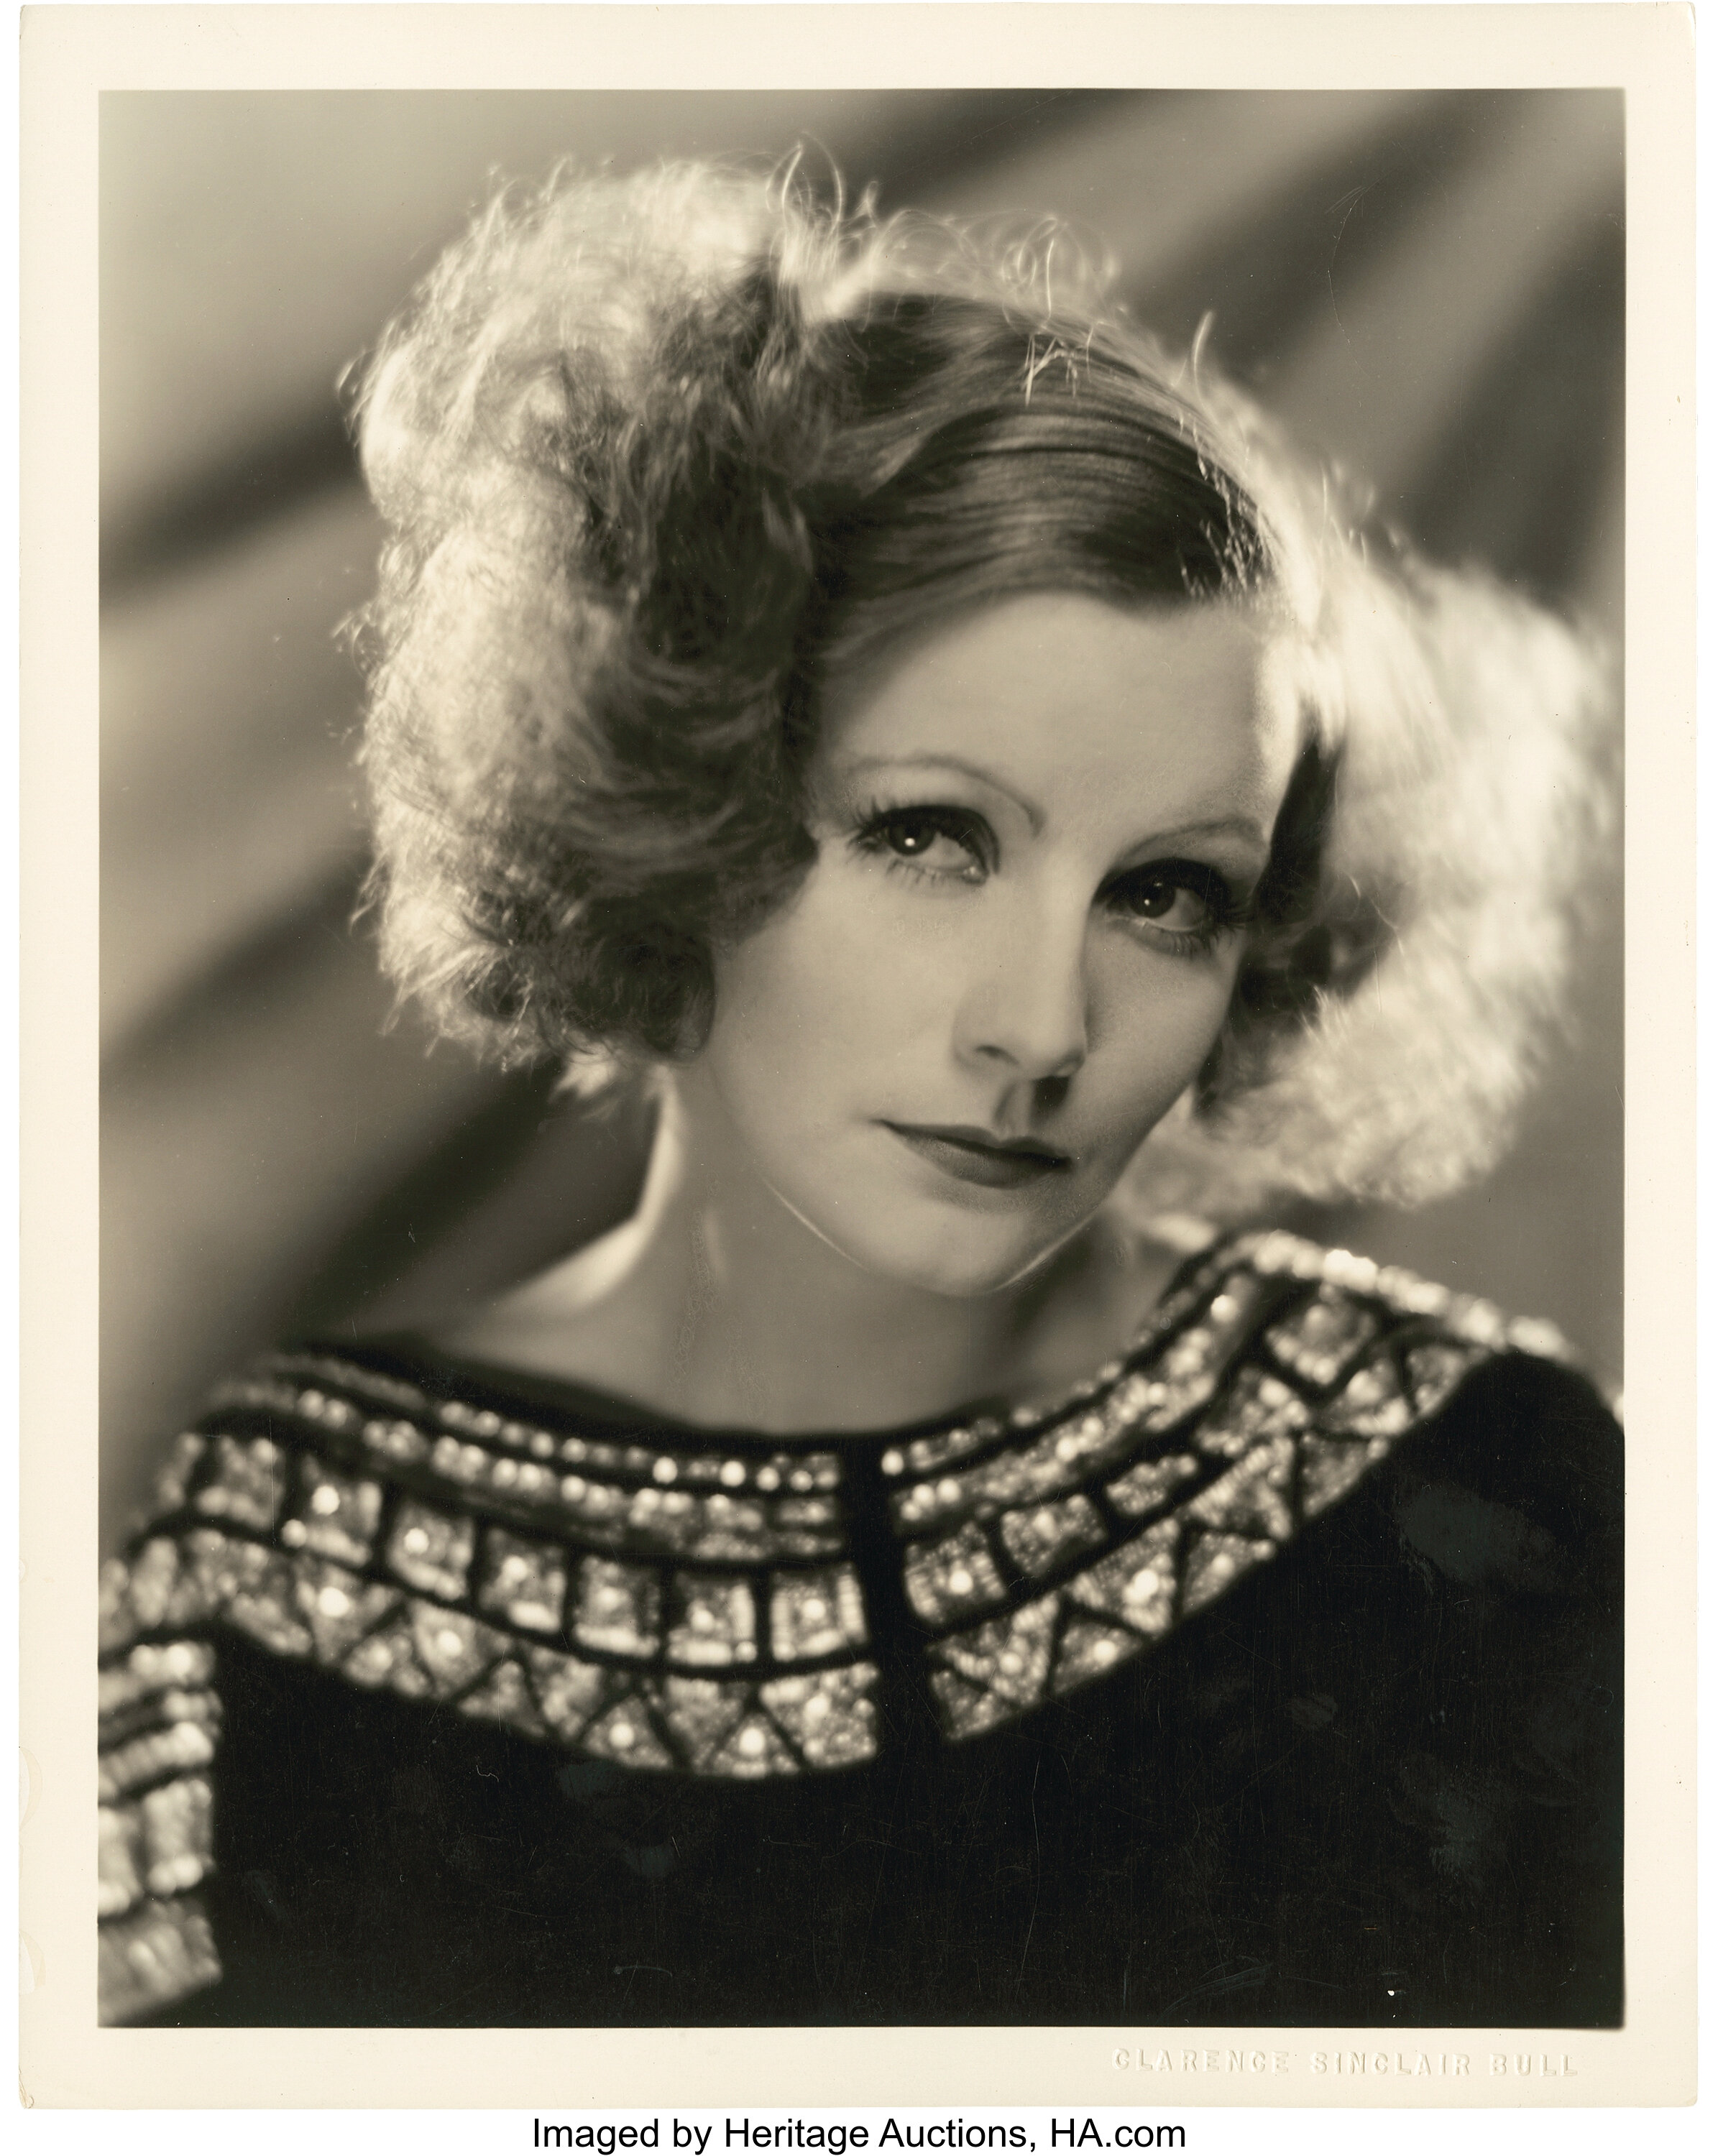 Greta Garbo In Inspiration By Clarence Sinclair Bull Mgm 1931 Lot 85122 Heritage Auctions